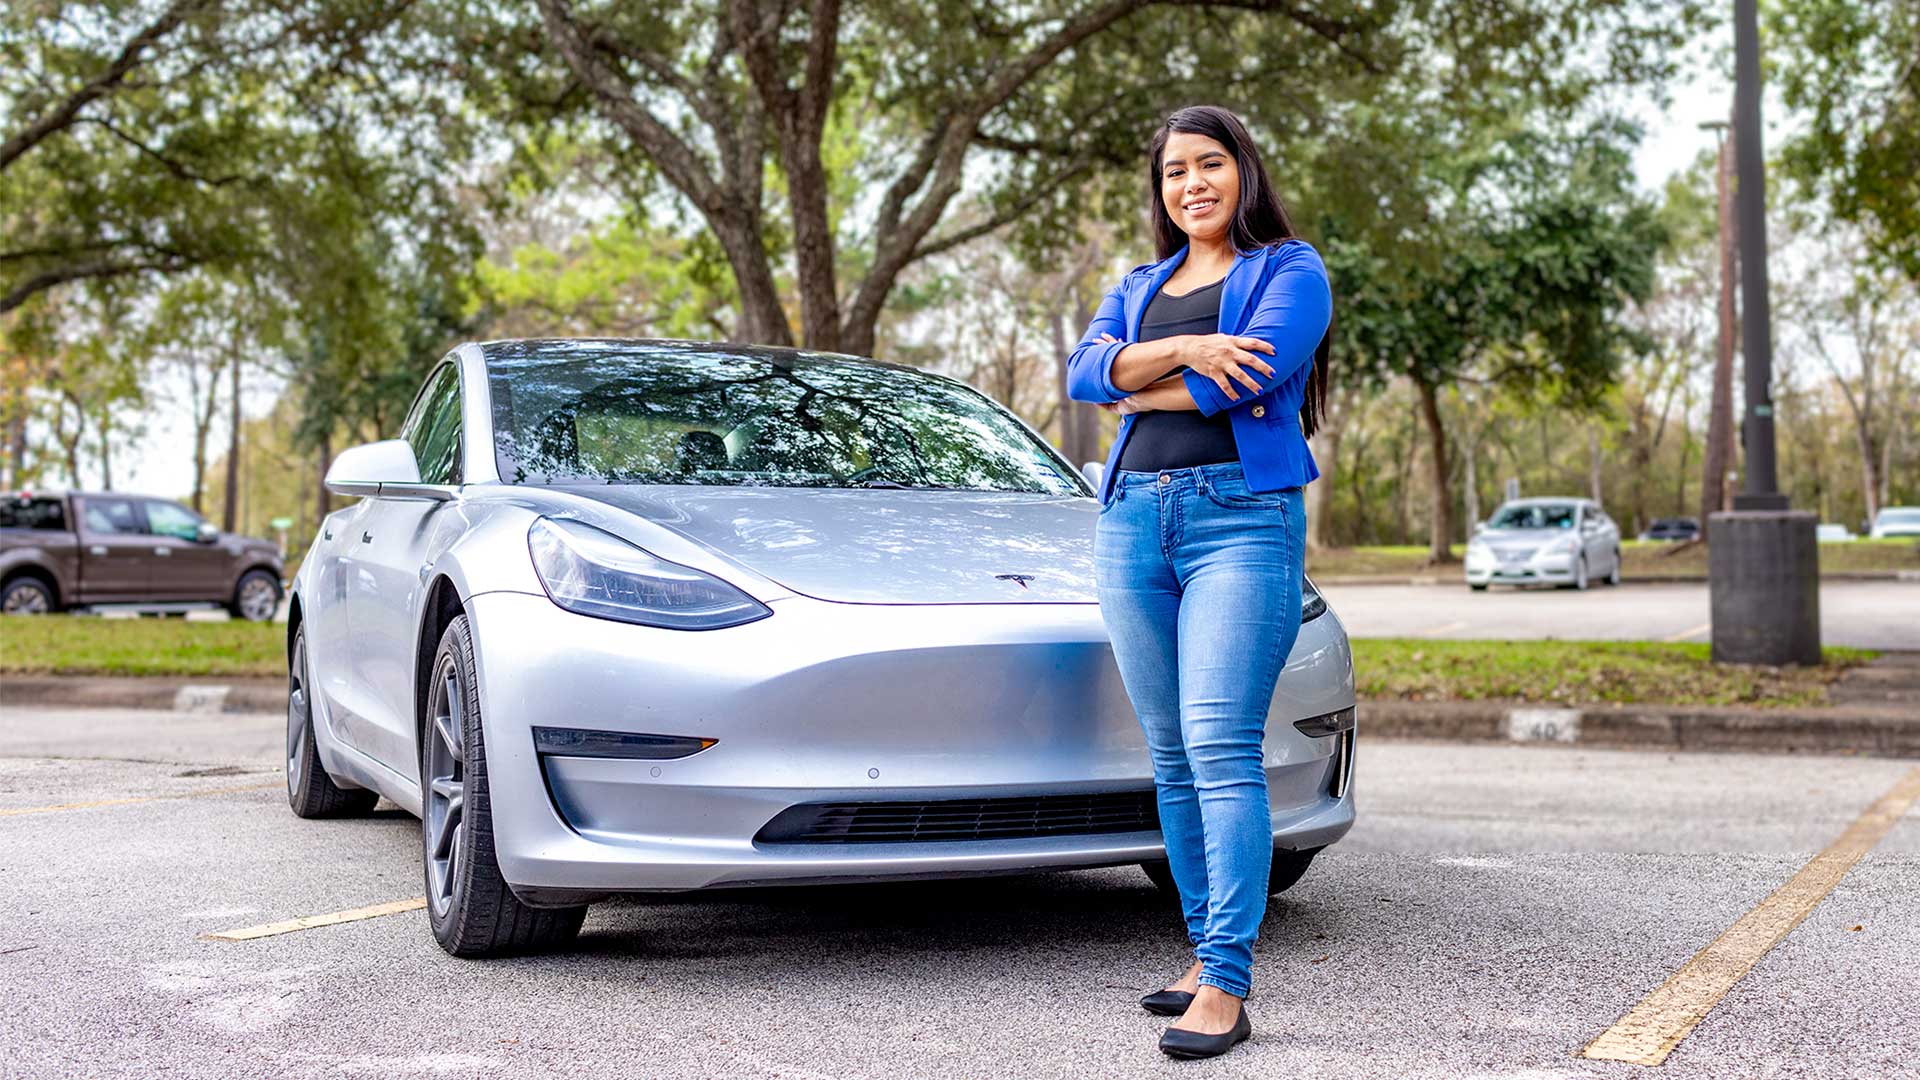 Tesla intern, UHCL student aims to support cleaner energy